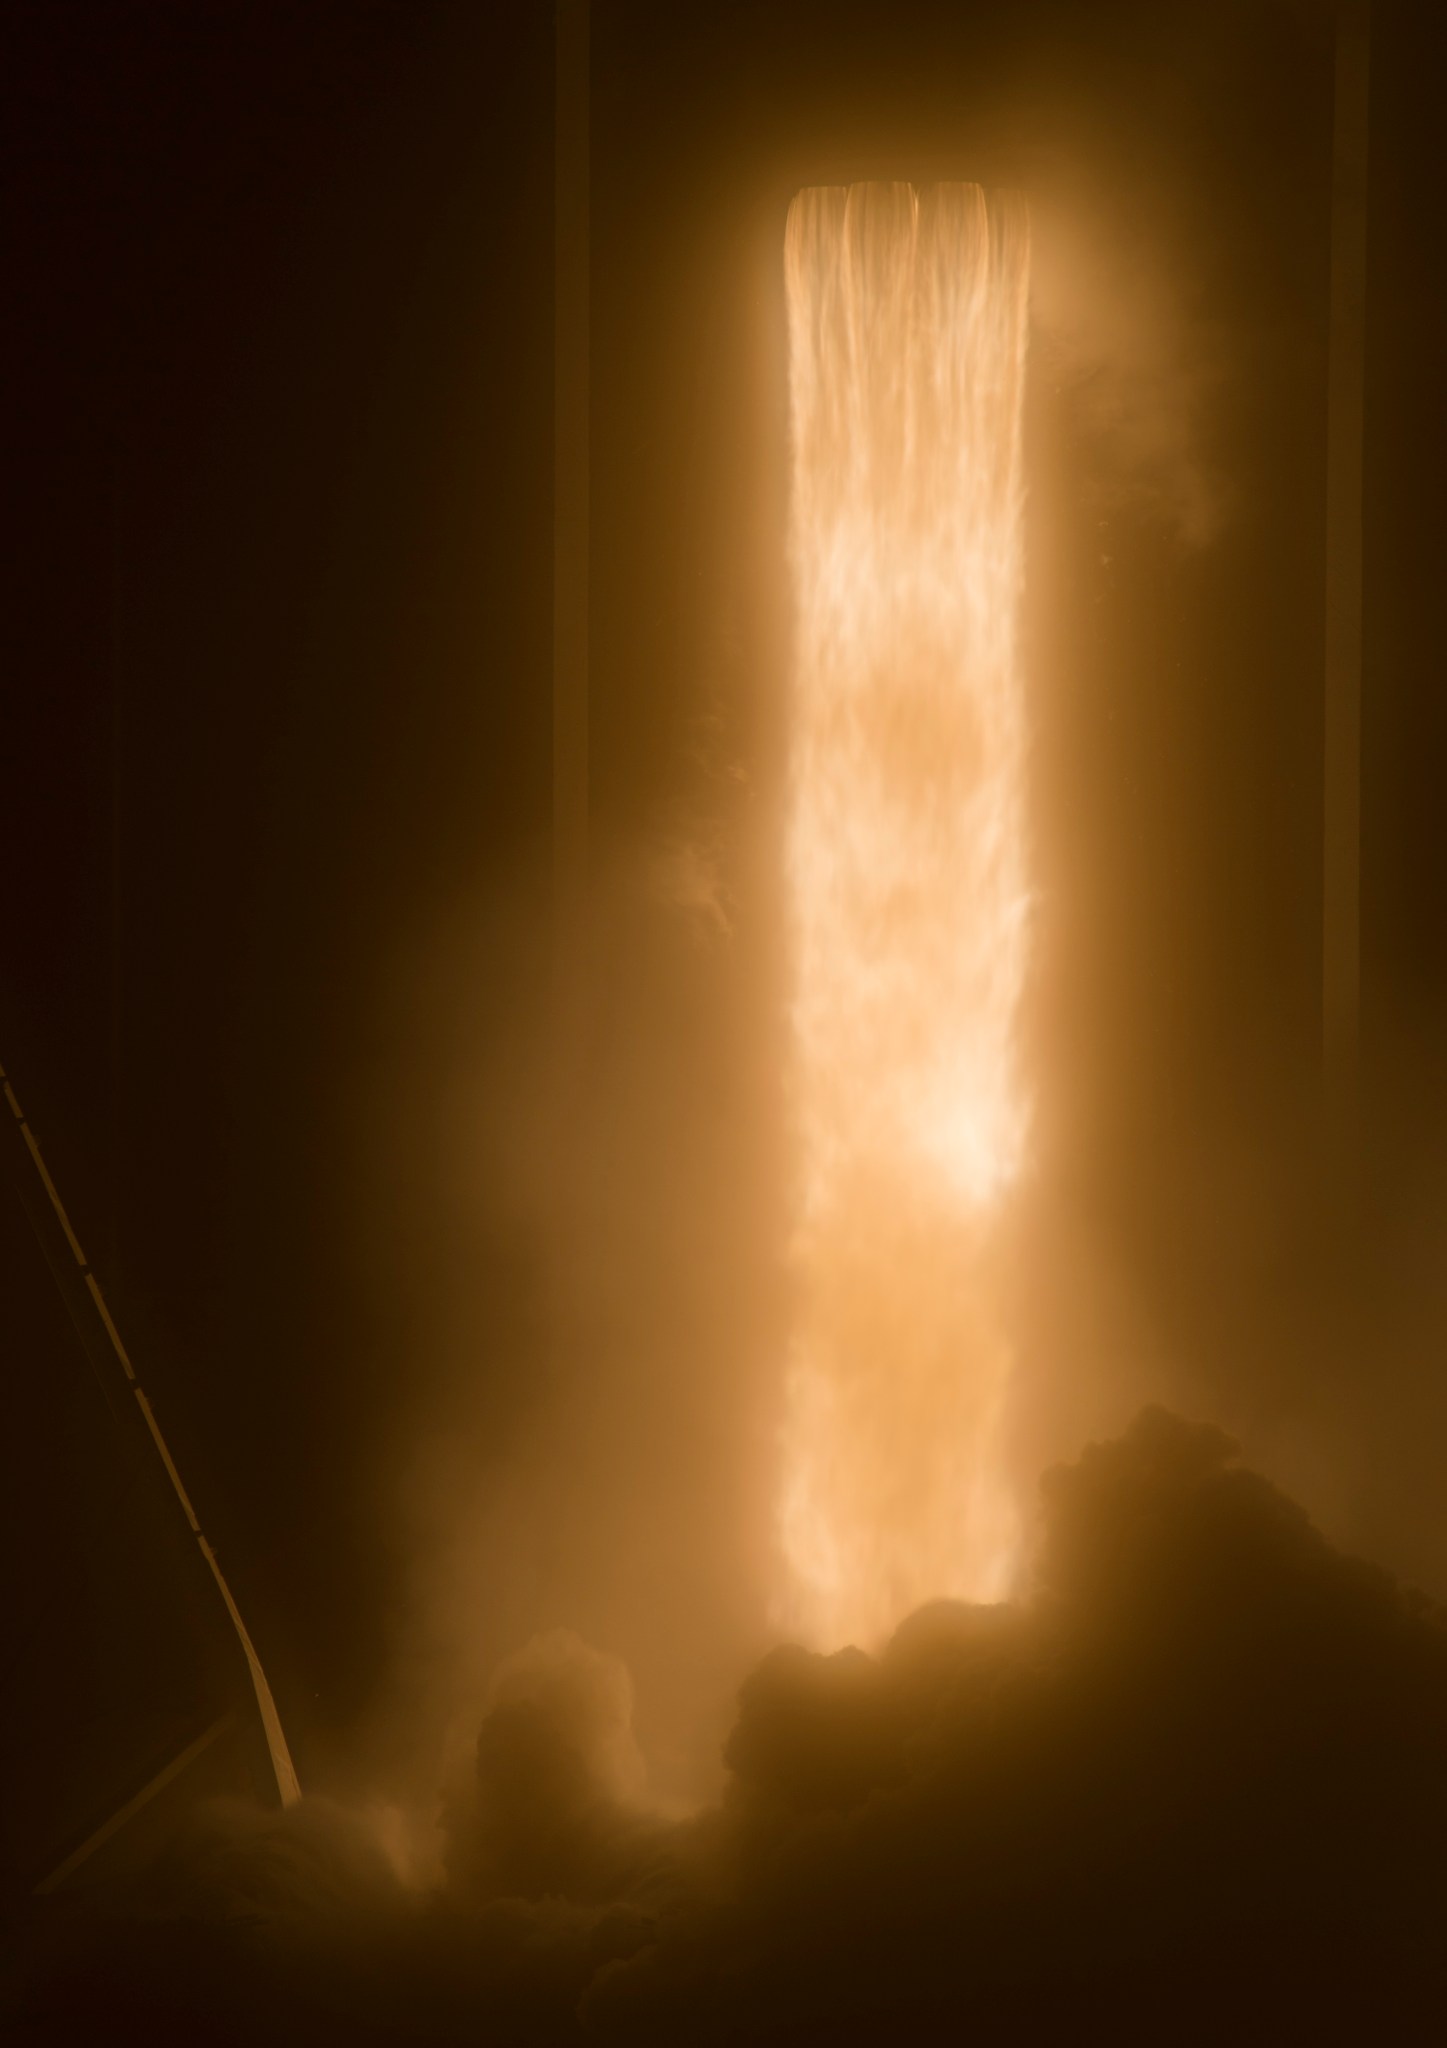 SpaceX Demo-1 launch, March 2, 2019